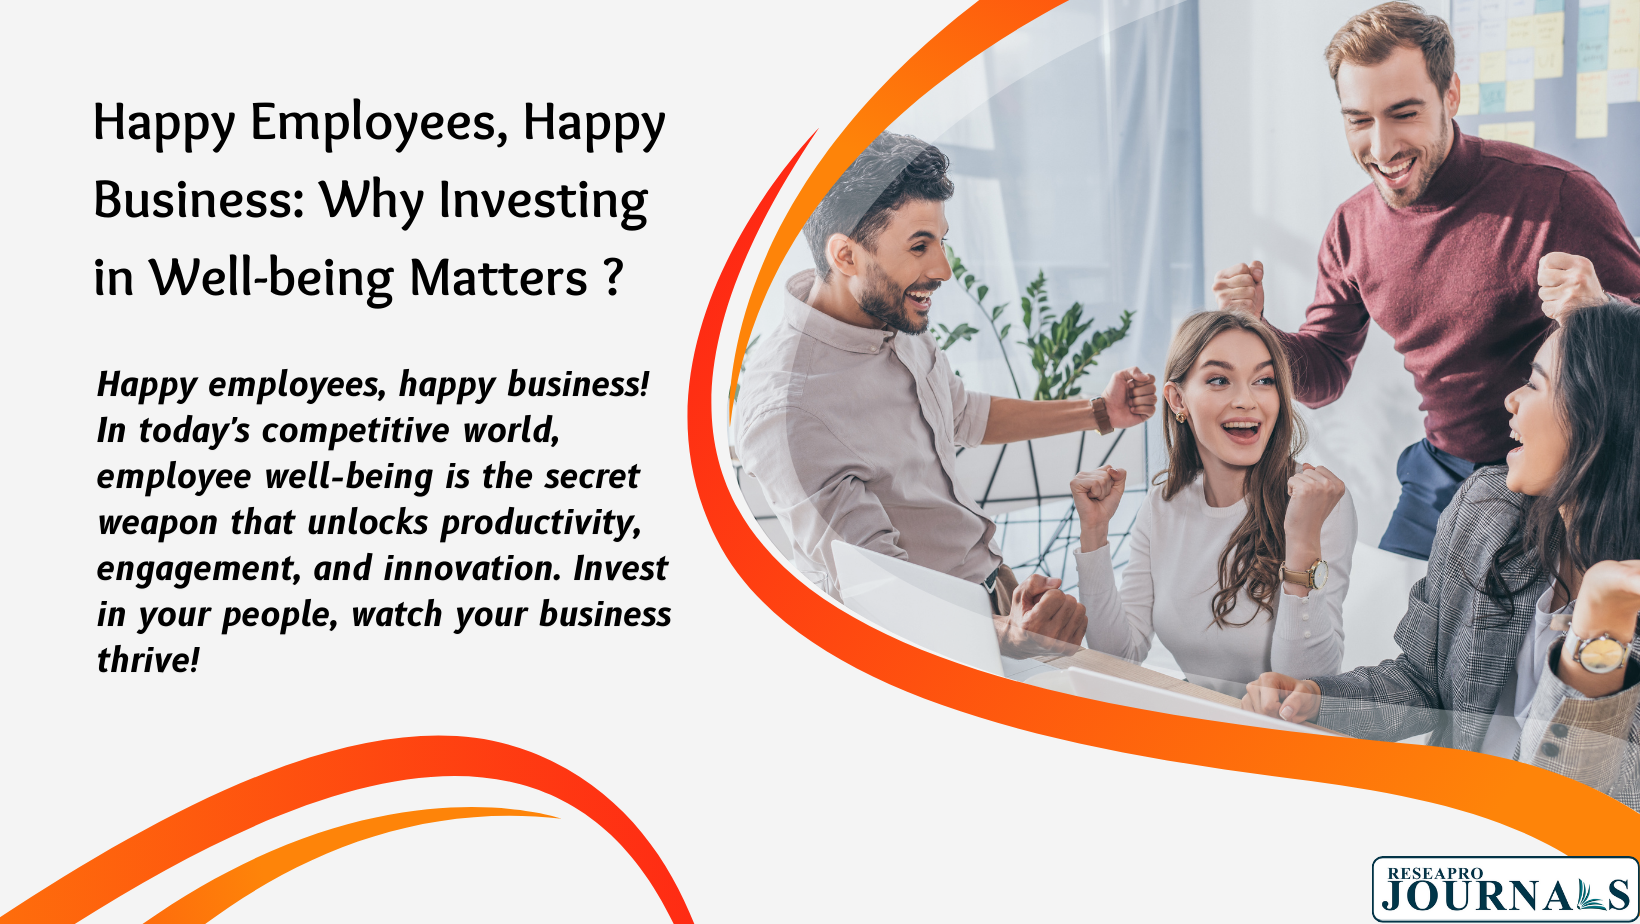 Happiness Pays: Investing in Employee Well-being for Business Success